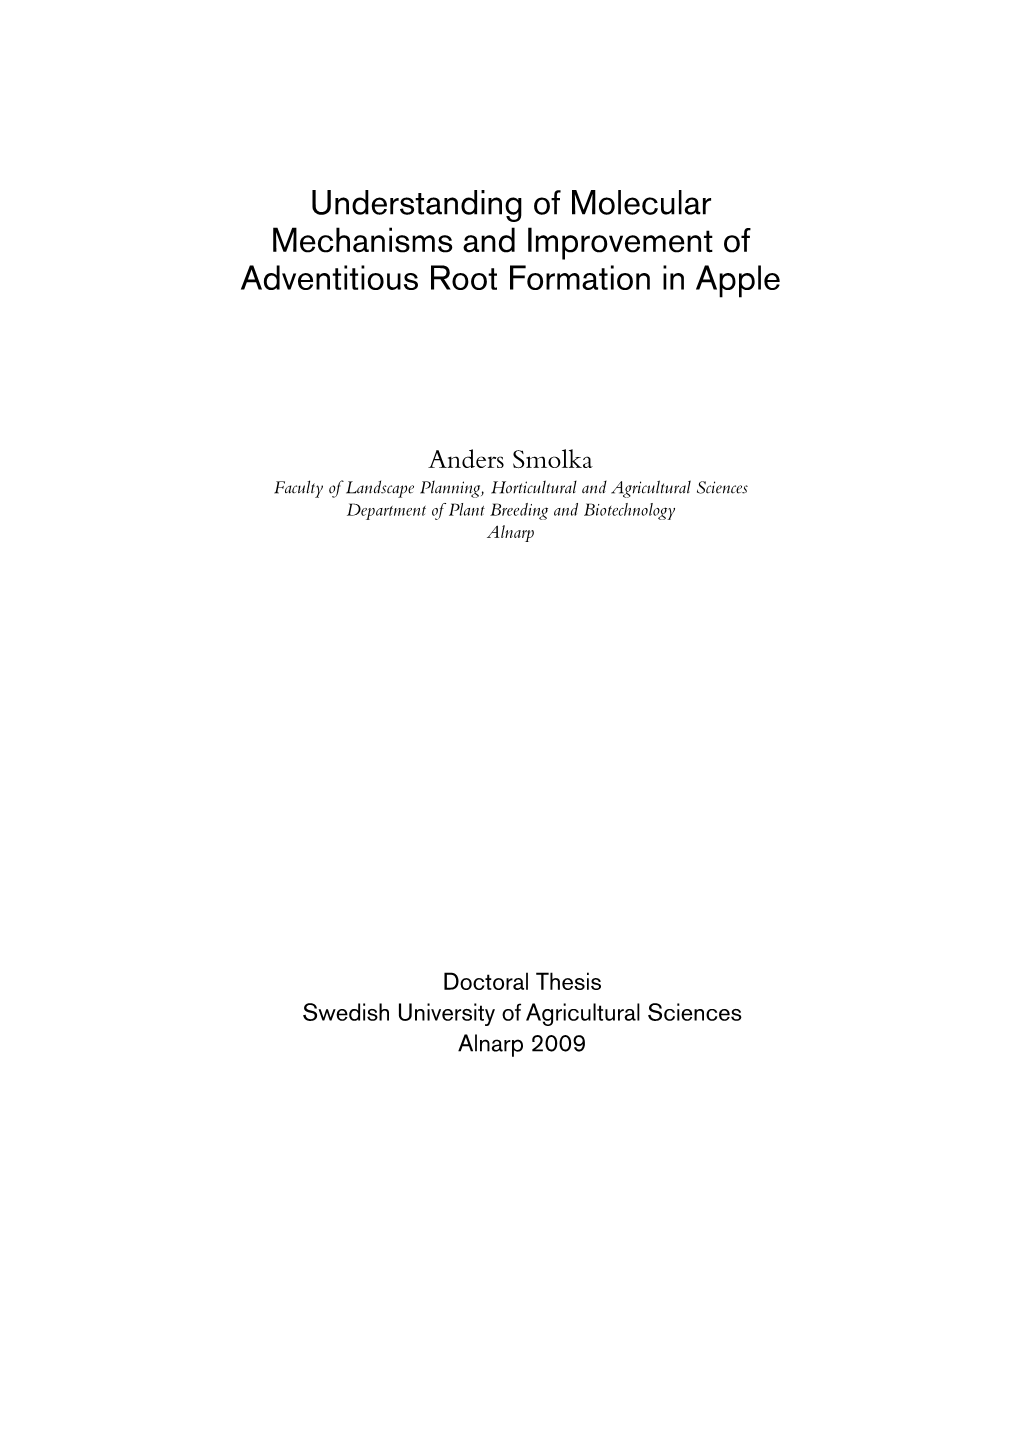 Understanding of Molecular Mechanisms and Improvement of Adventitious Root Formation in Apple